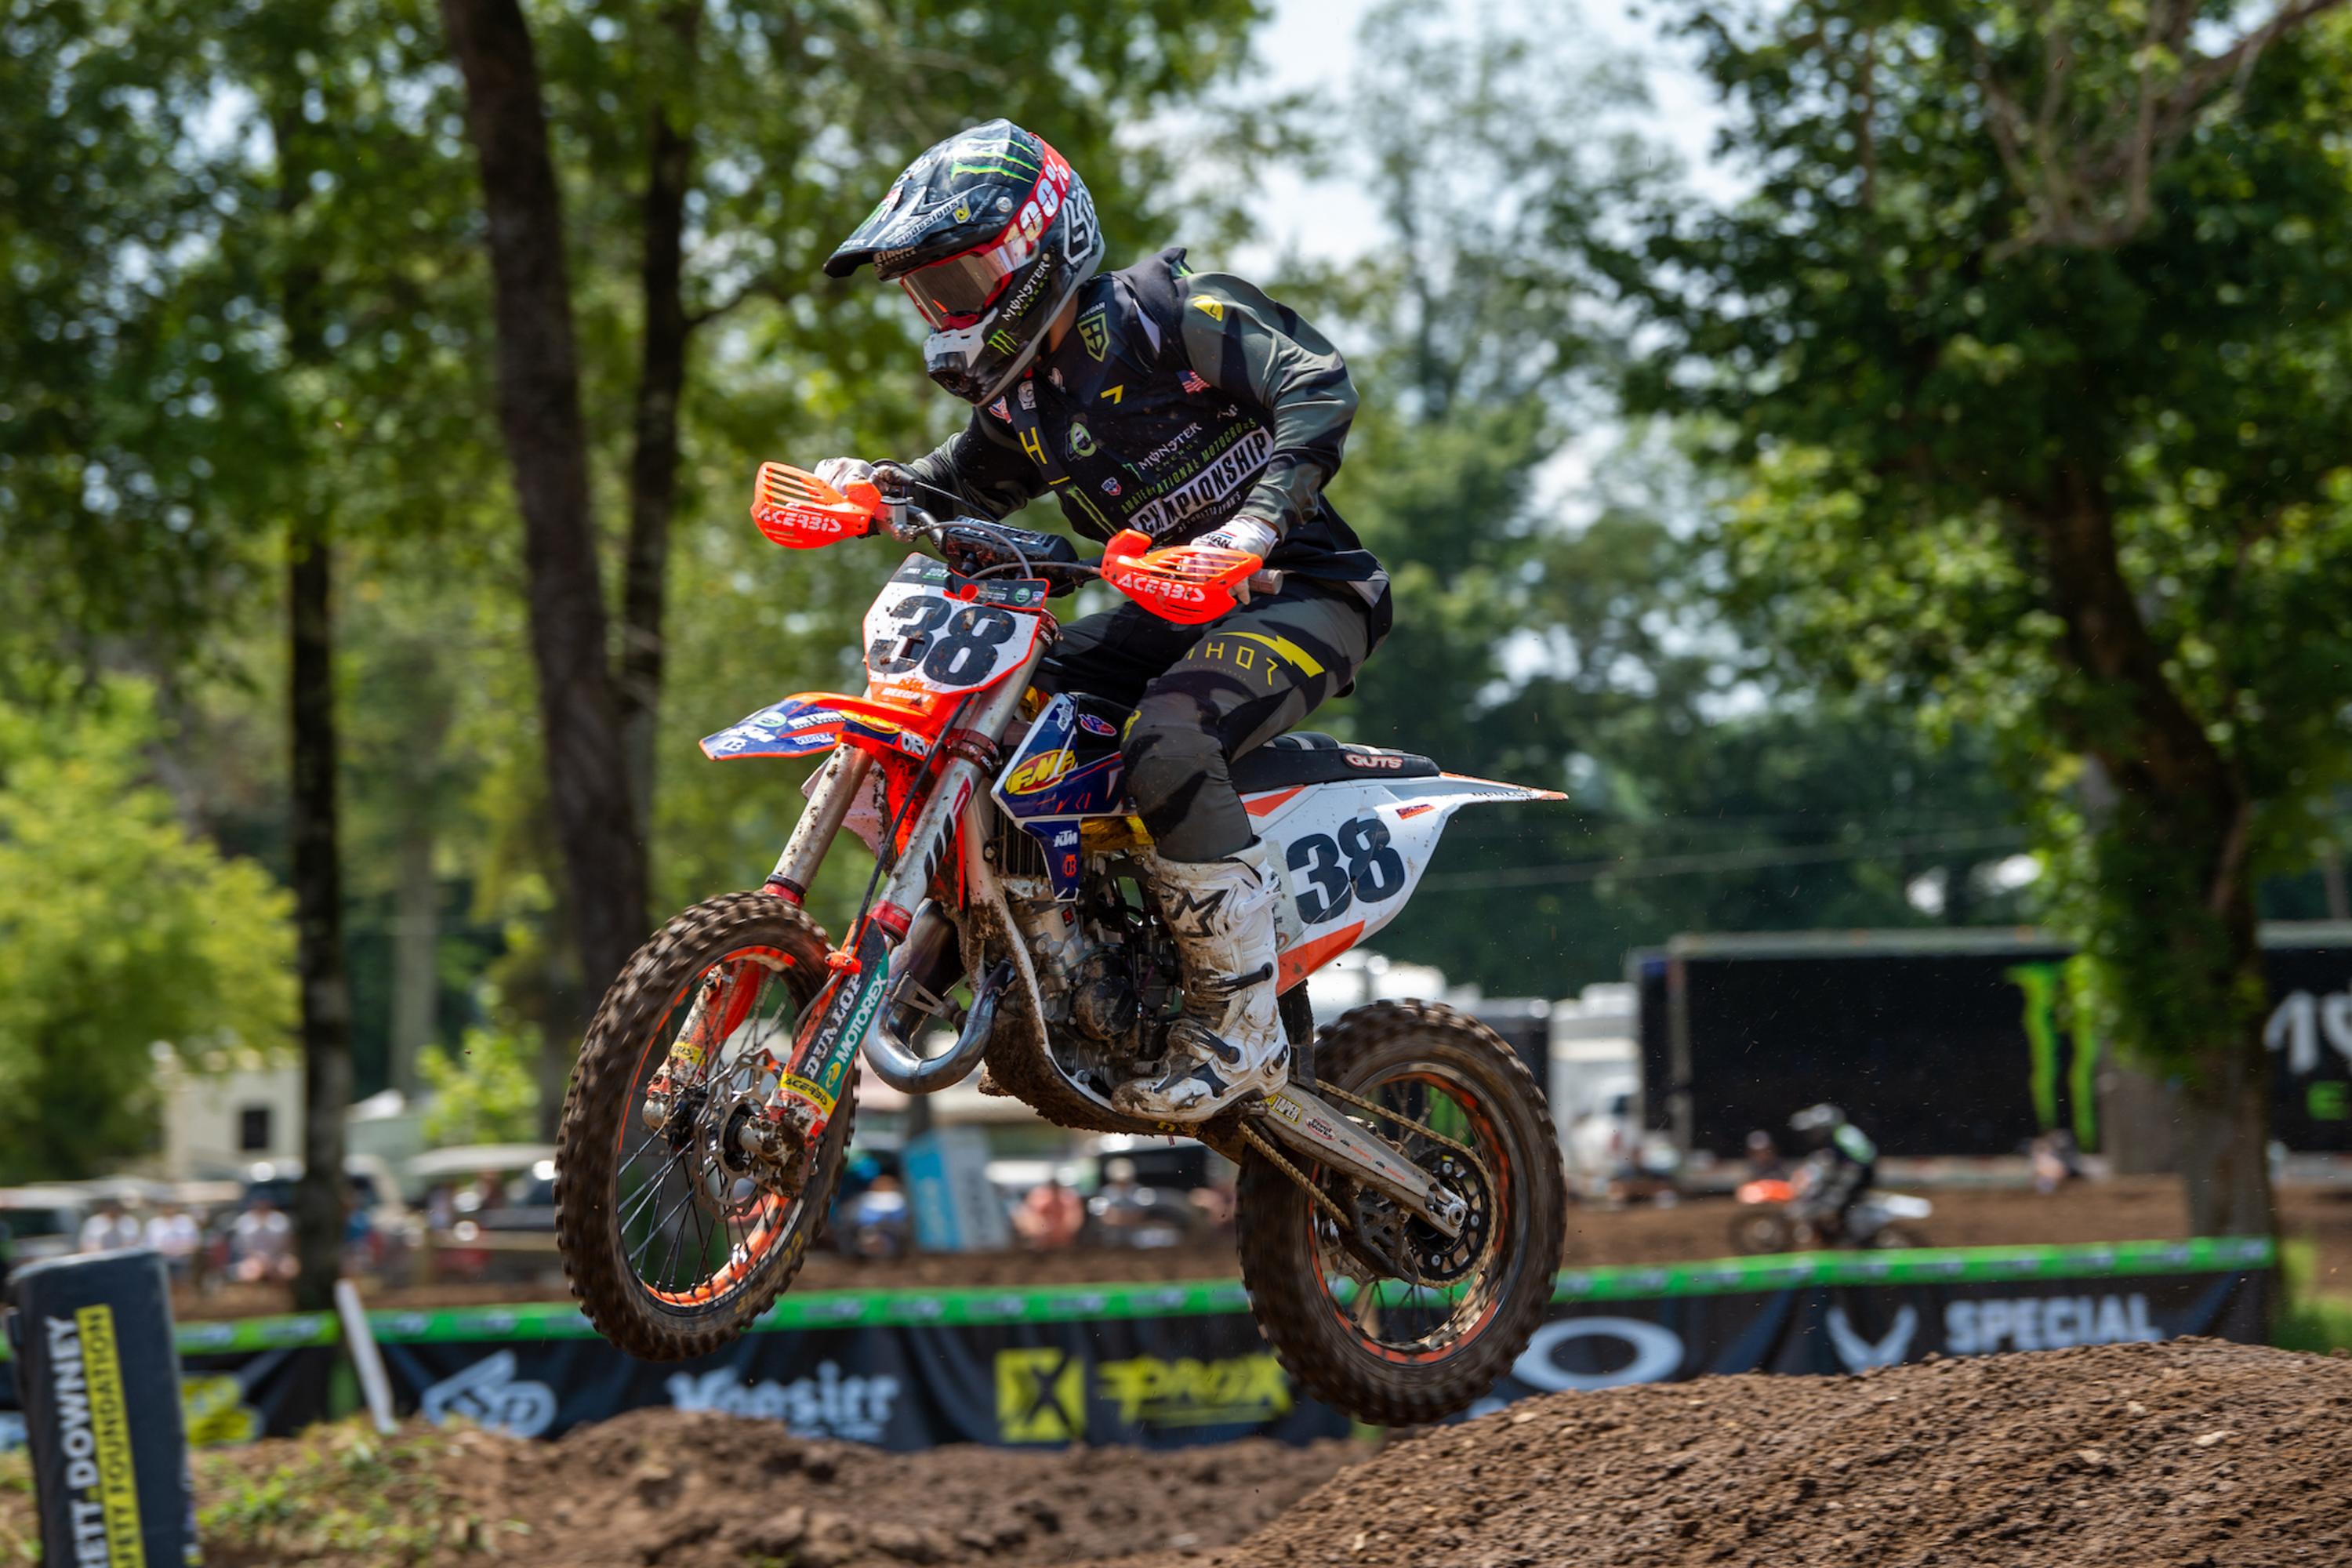 Title Fights Take Shape During Day 3 Action at Monster Energy AMA Amateur National Motocross Championship